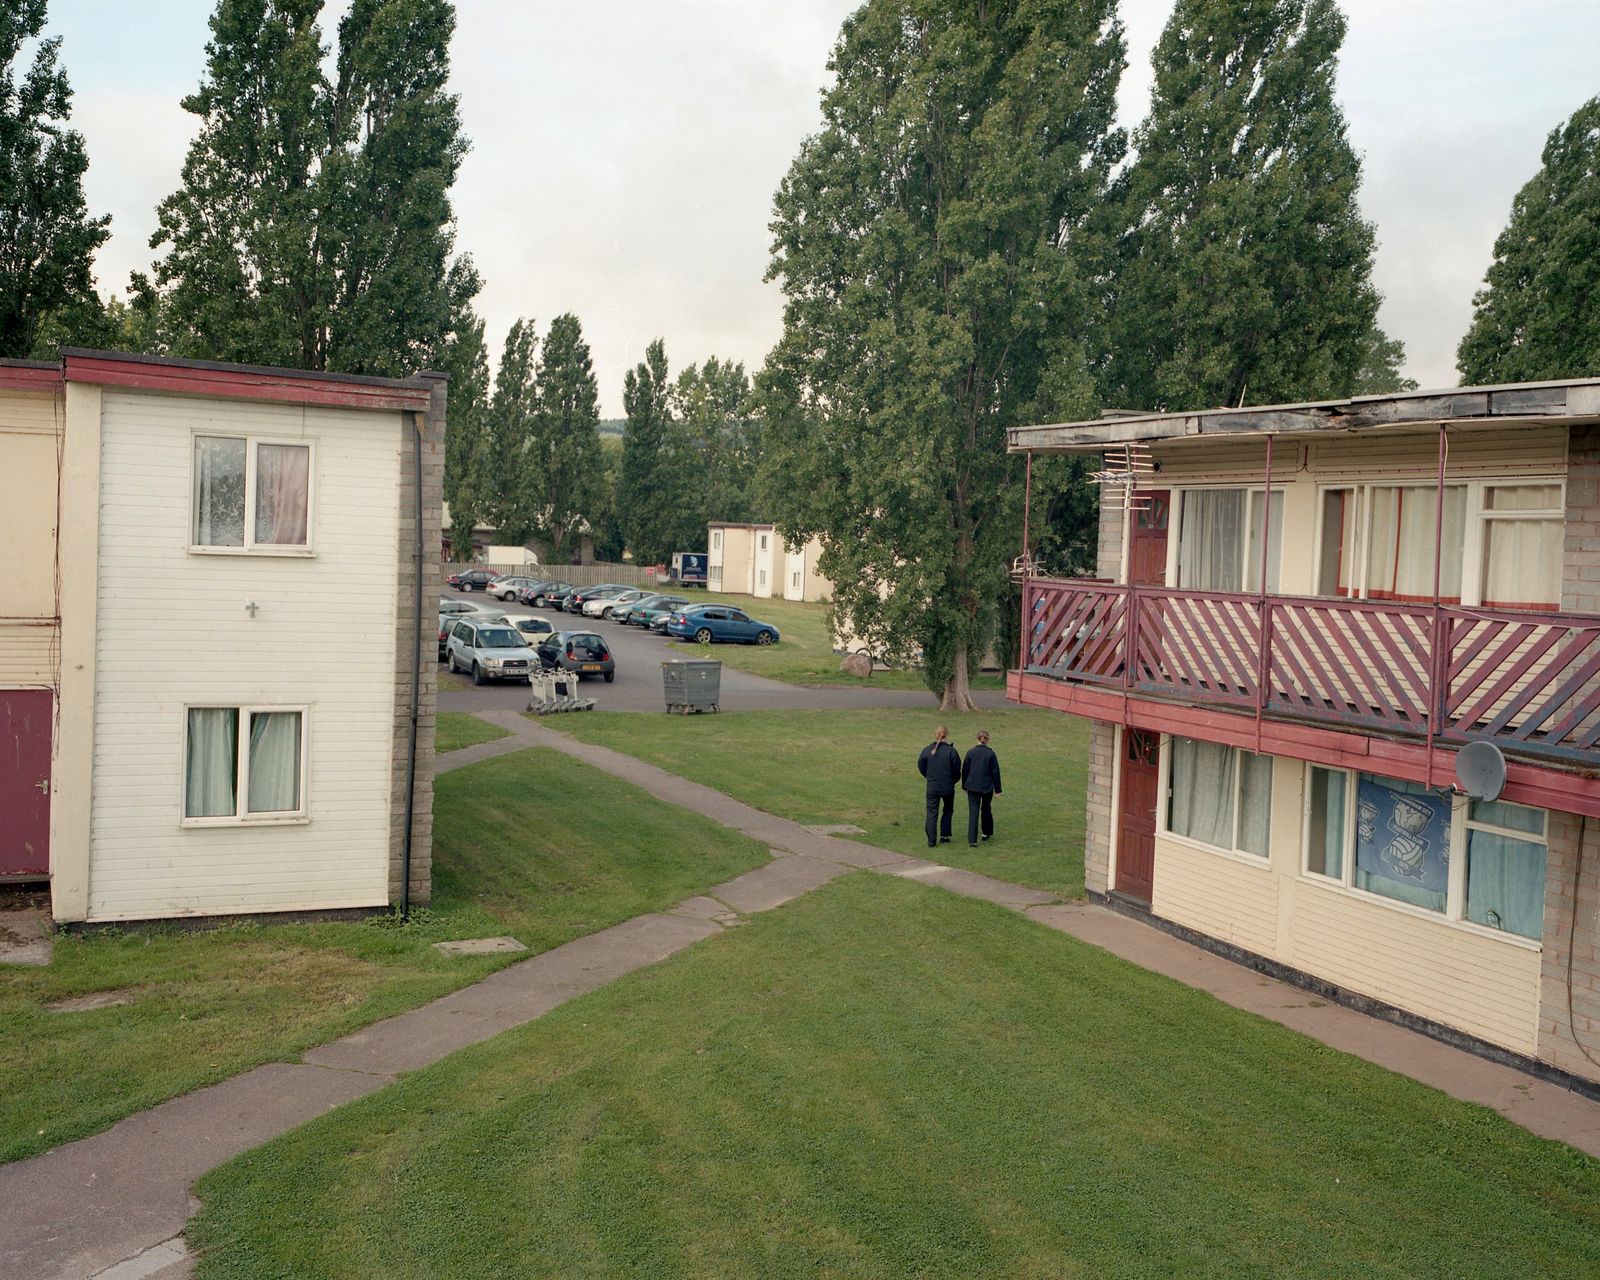 © Wiktor Kubiak - Image from the Butlins photography project